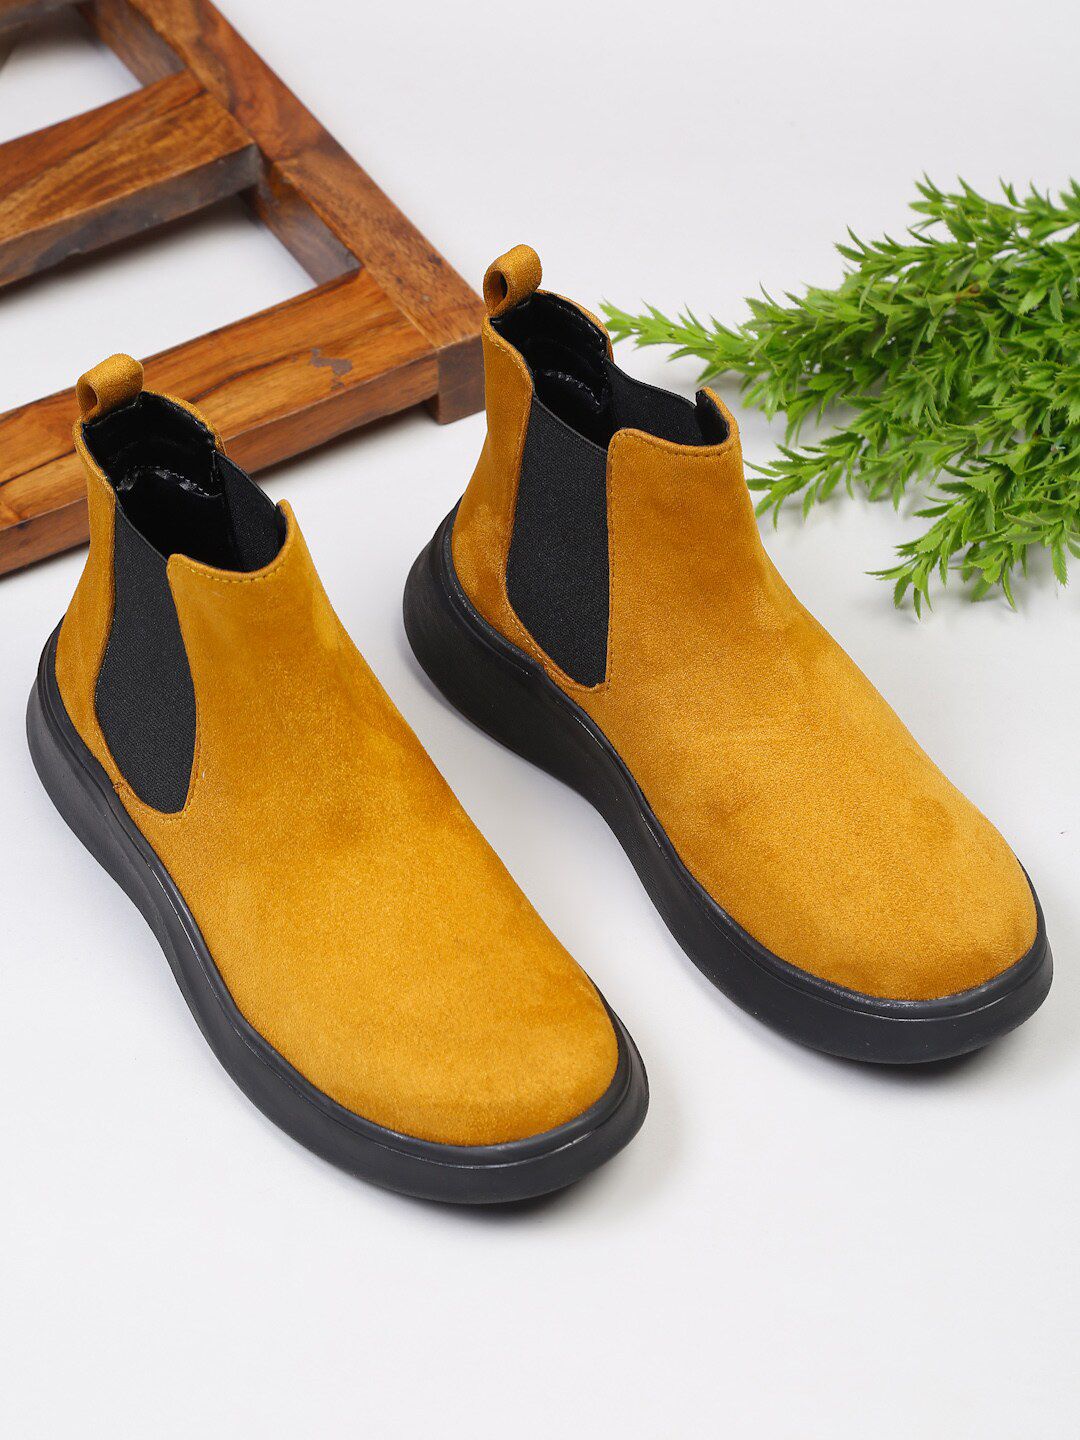 Bruno Manetti Women Yellow Colourblocked Suede Flat Boots Price in India